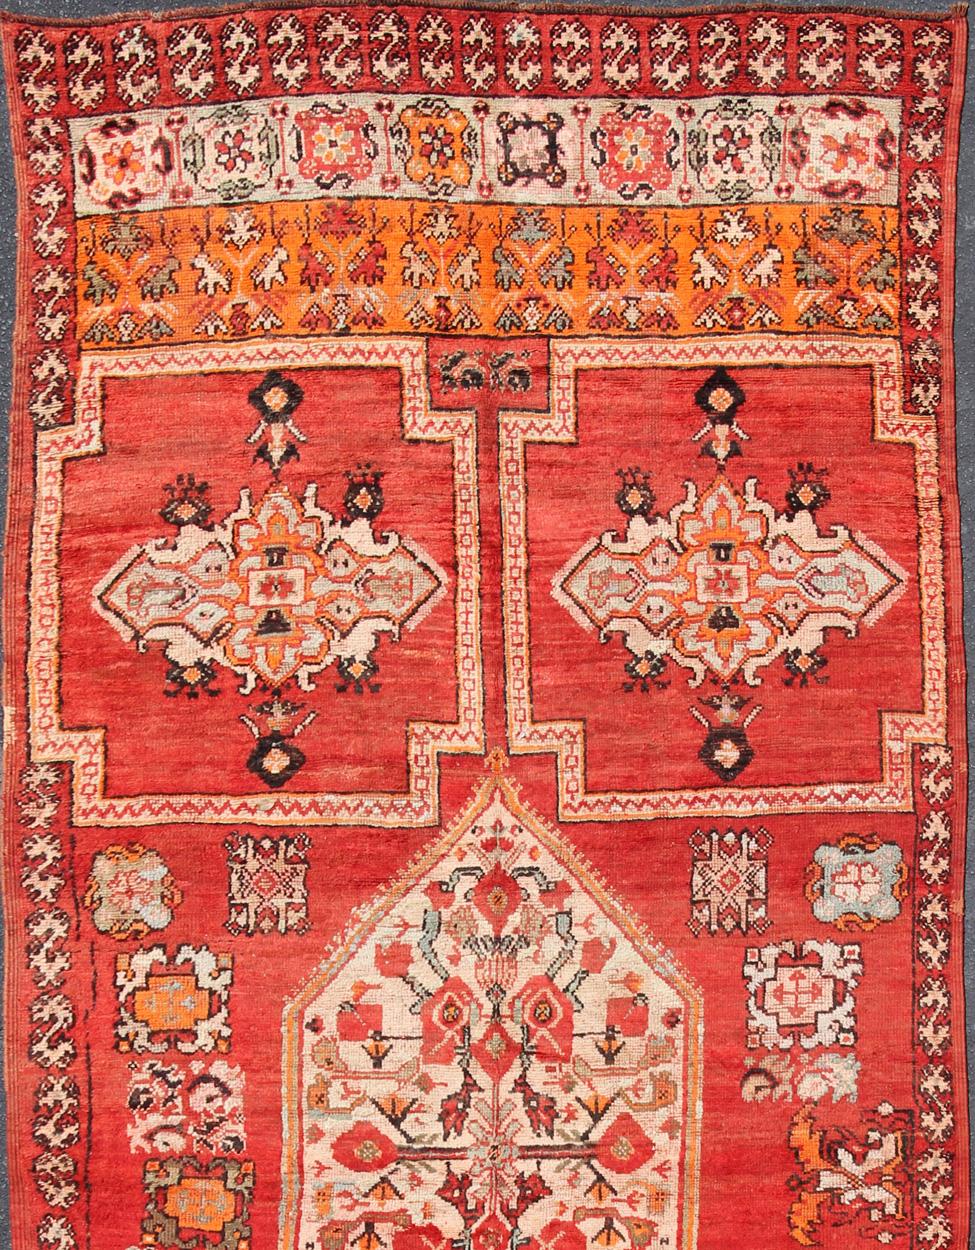 Moroccan large Gallery Runner, rug 13-0905, country of origin / type: Morocco / Tribal, circa Mid-20th Century.

Measures: 6'4 x 15'8.

This gorgeous vintage Moroccan carpet from the Mid-20th century displays a stunning large medallions and palette